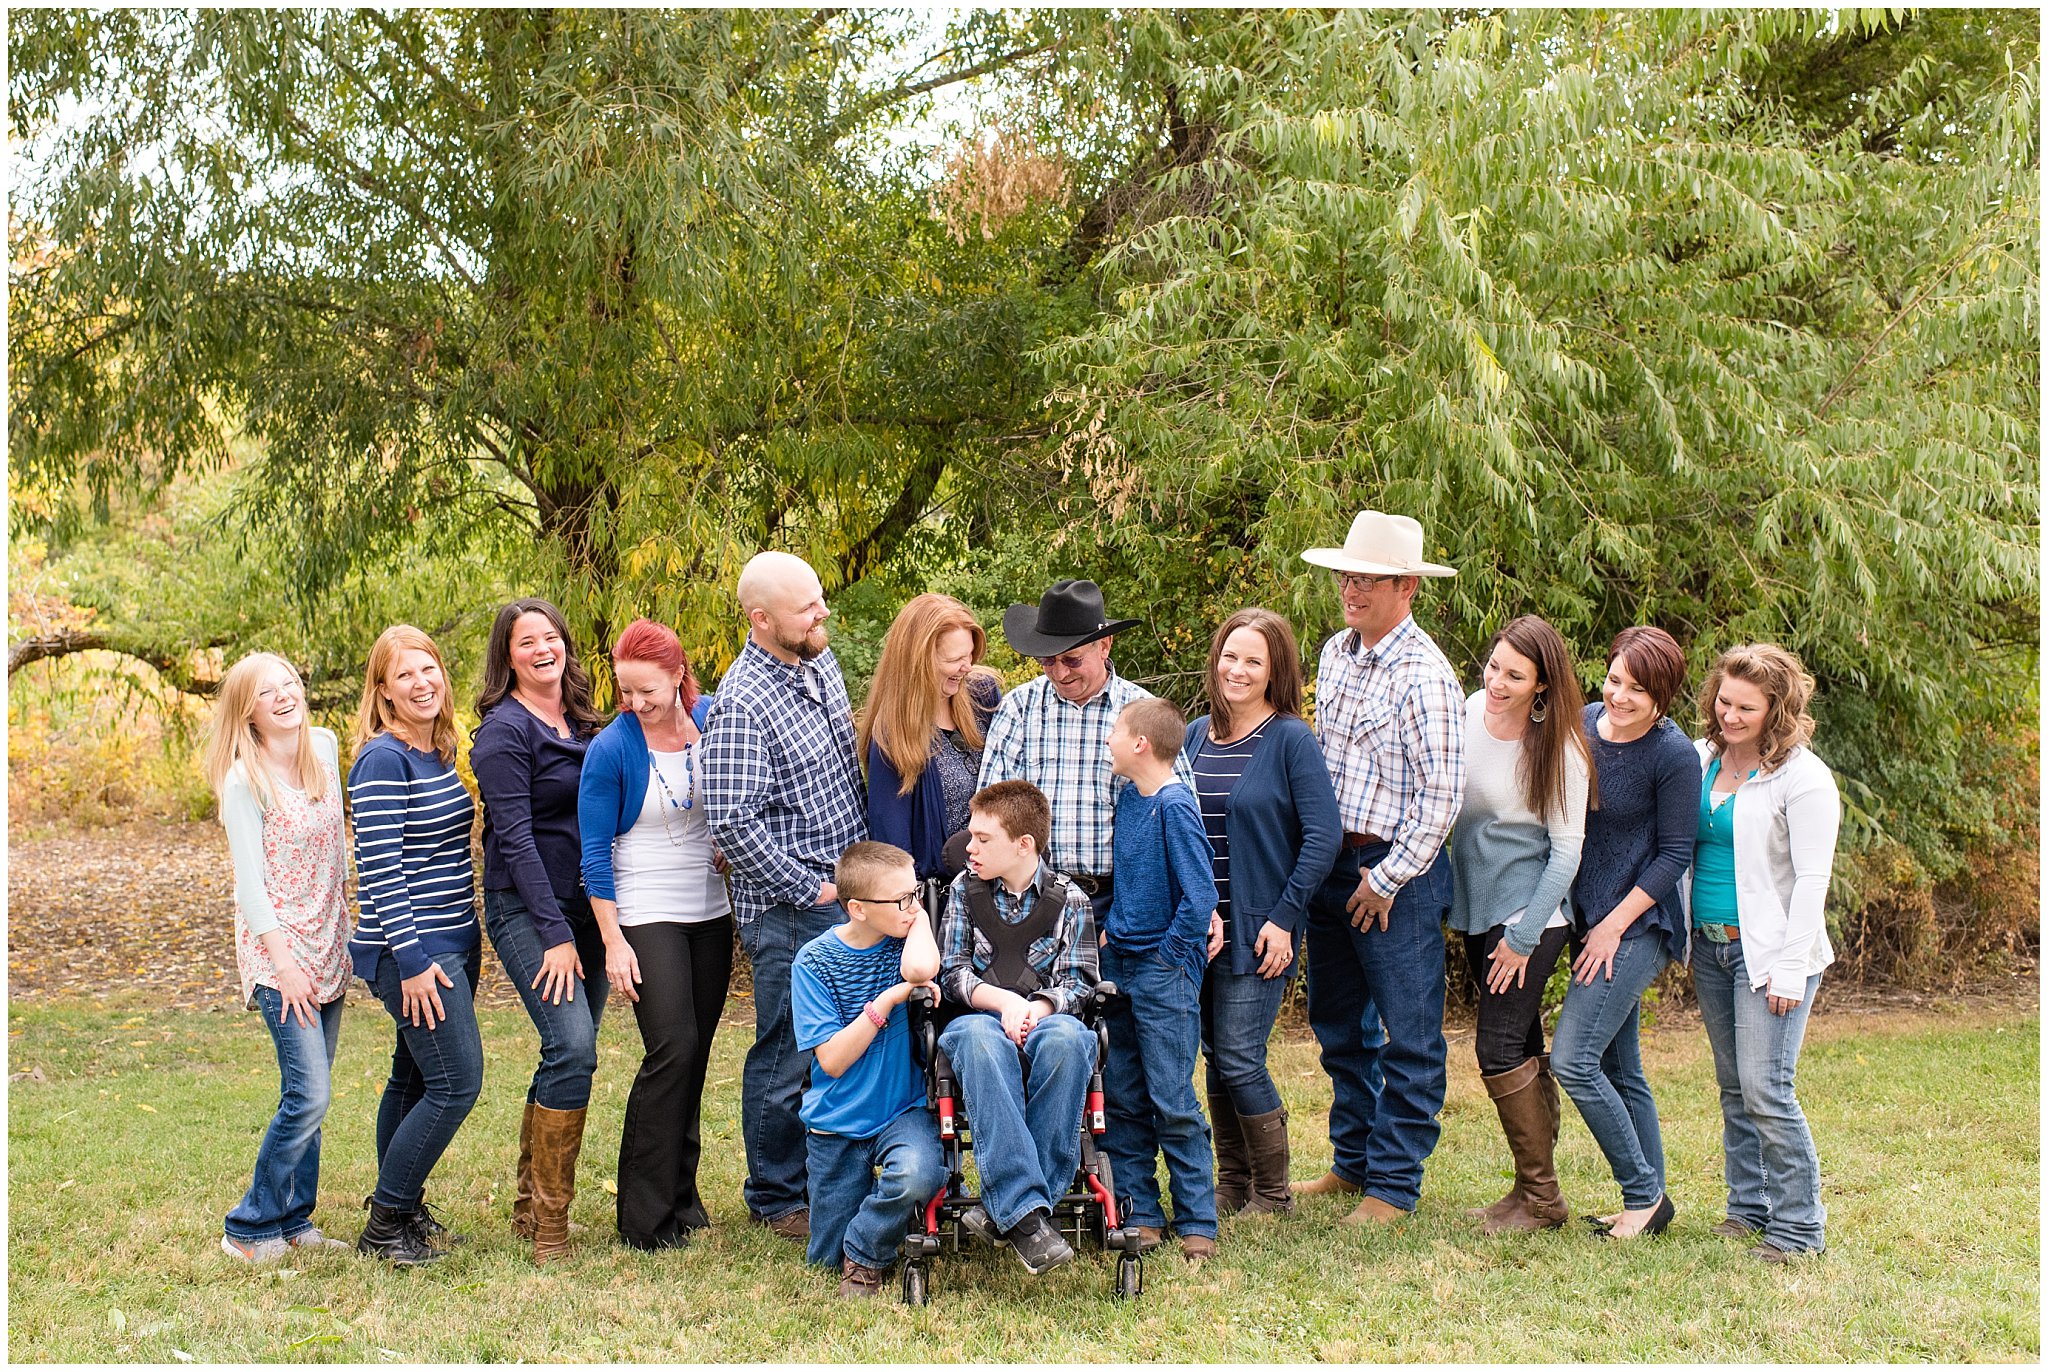 Large family of 12 kids looking at laughing | Tremonton Family Pictures and Make a Wish Event | Jessie and Dallin Photography